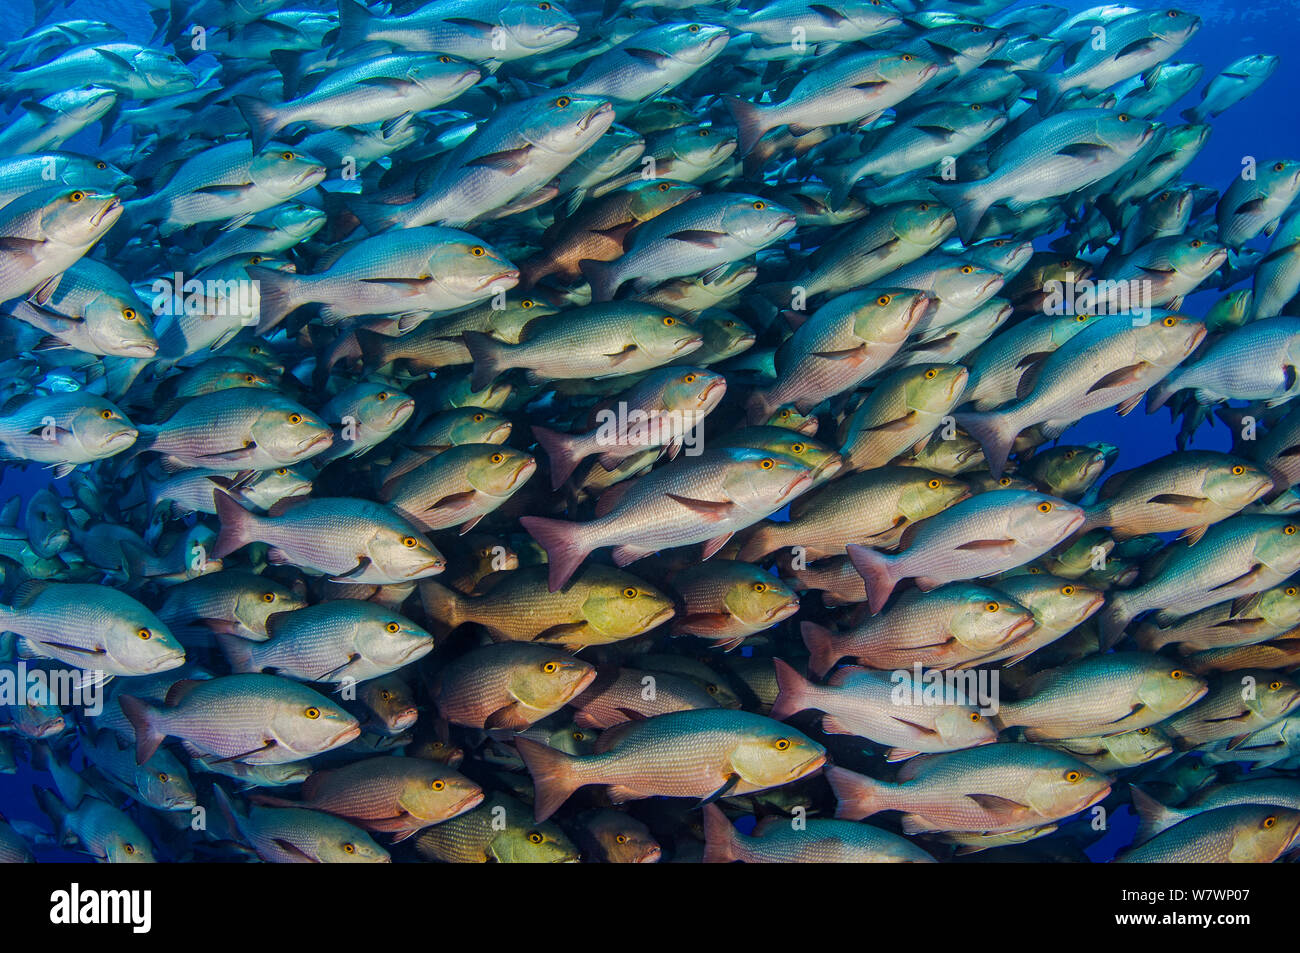 Large school of Bohar snappers (Lutjanus bohar) which have gathered in the summer in the Red Sea for spawning. Each fish is between 60 and 80cm long. Shark Reef, Ras Mohammed Marine Park, Sinai, Egypt. Red Sea. Stock Photo